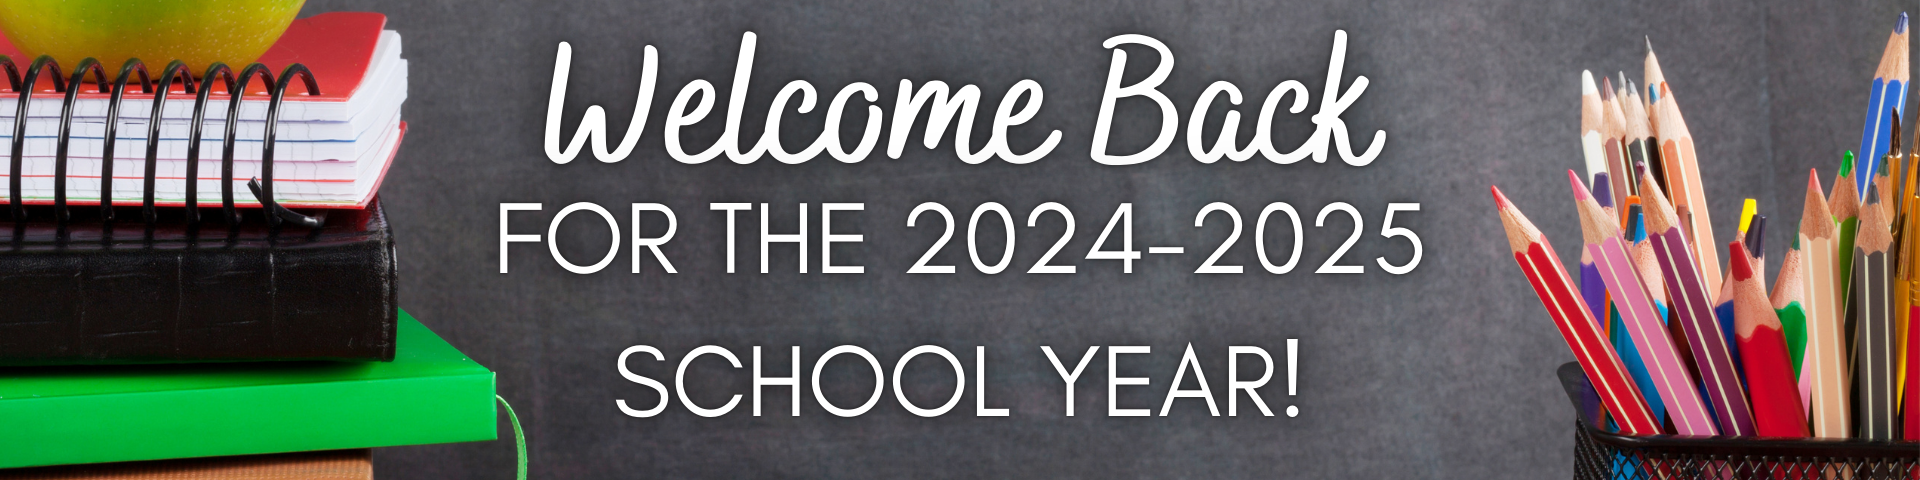 Welcome Back to the 2024-2025 School Year!